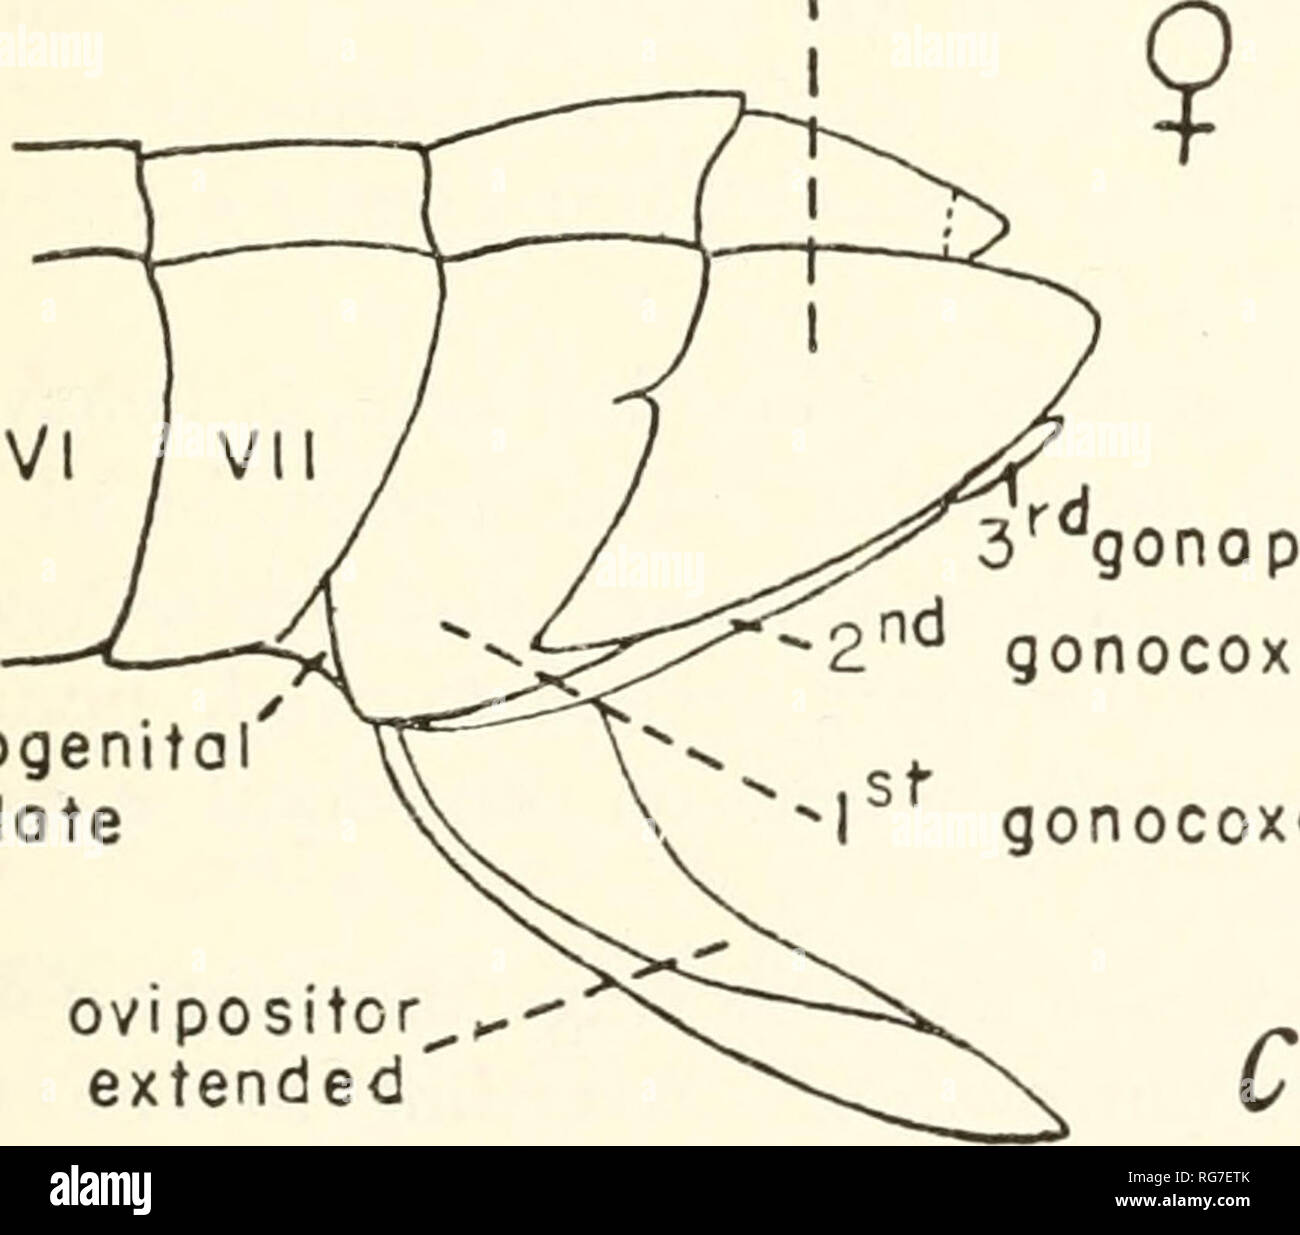 . Bulletin - United States National Museum. Science. - -rrjrr rJJ--&quot;-J&quot; parameres --proctiger —pygophore 9th paratergite i. 3r gonapophysis subgenital plate -2™ gonocoxopodite gonocoxopodite ovipositor^,, •- extended Figure 1.—Structures used in classification: a, Stephanitis ligyra Drake, lateral aspect; b, Tingis cardui (Linnaeus), ventral aspect of cf genital capsule; c, same, lateral aspect of 9 genital segments. Cryptic coloration enters into the living picture in various ways. In the species of many genera, the paranota and elytra are broadly produced outwardly beyond the body Stock Photo